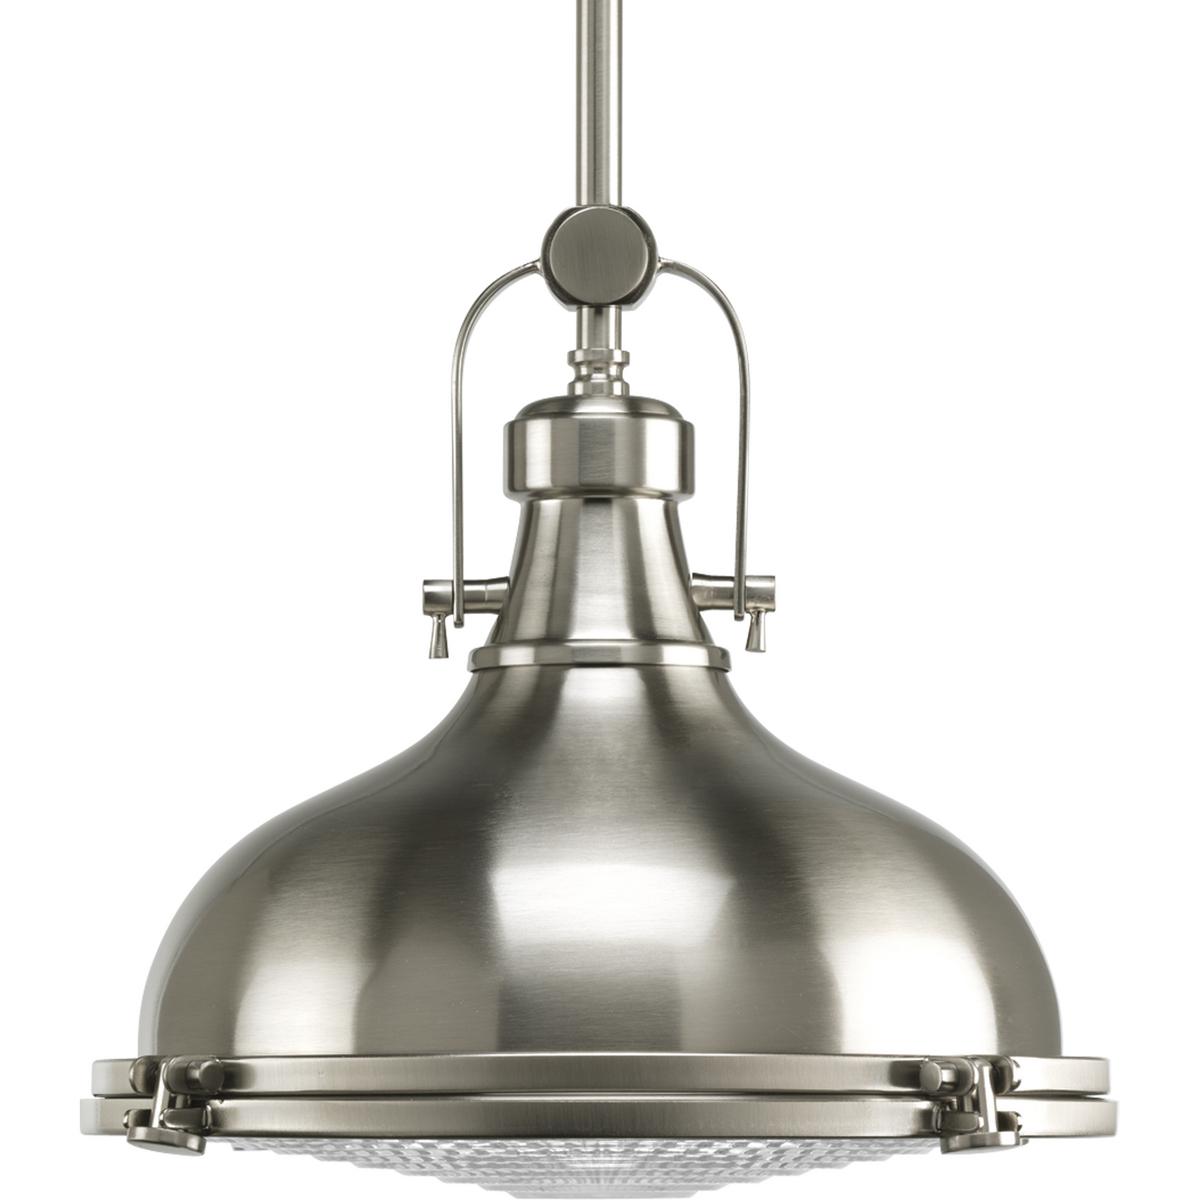 Hubbell P5188-09 The one-light 12" pendant features industrial roots in both form and function. The Brushed Nickel finish highlight the high-quality prismatic glass which adds to the historical aesthetic. Antique style fixture includes a hinge-locking nautical design allo